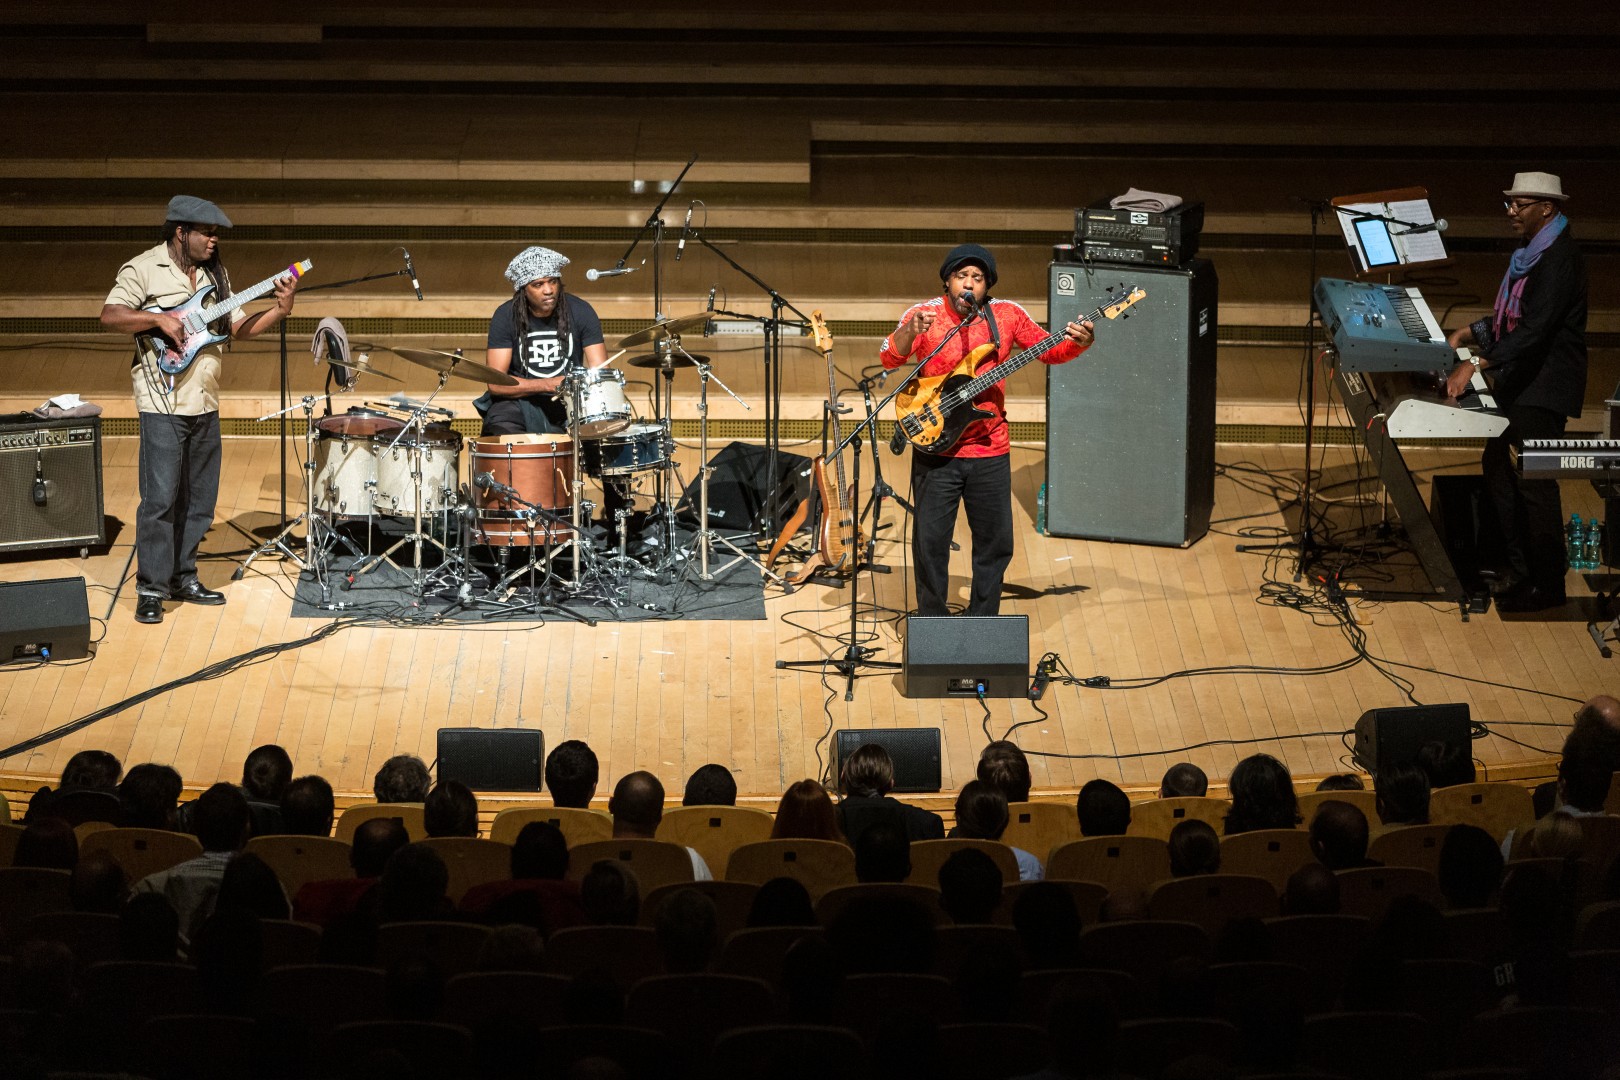 Victor Wooten Band at Sala Radio "Mihail Jora" in Bucharest on October 23, 2014 (1a6a56e7d6)